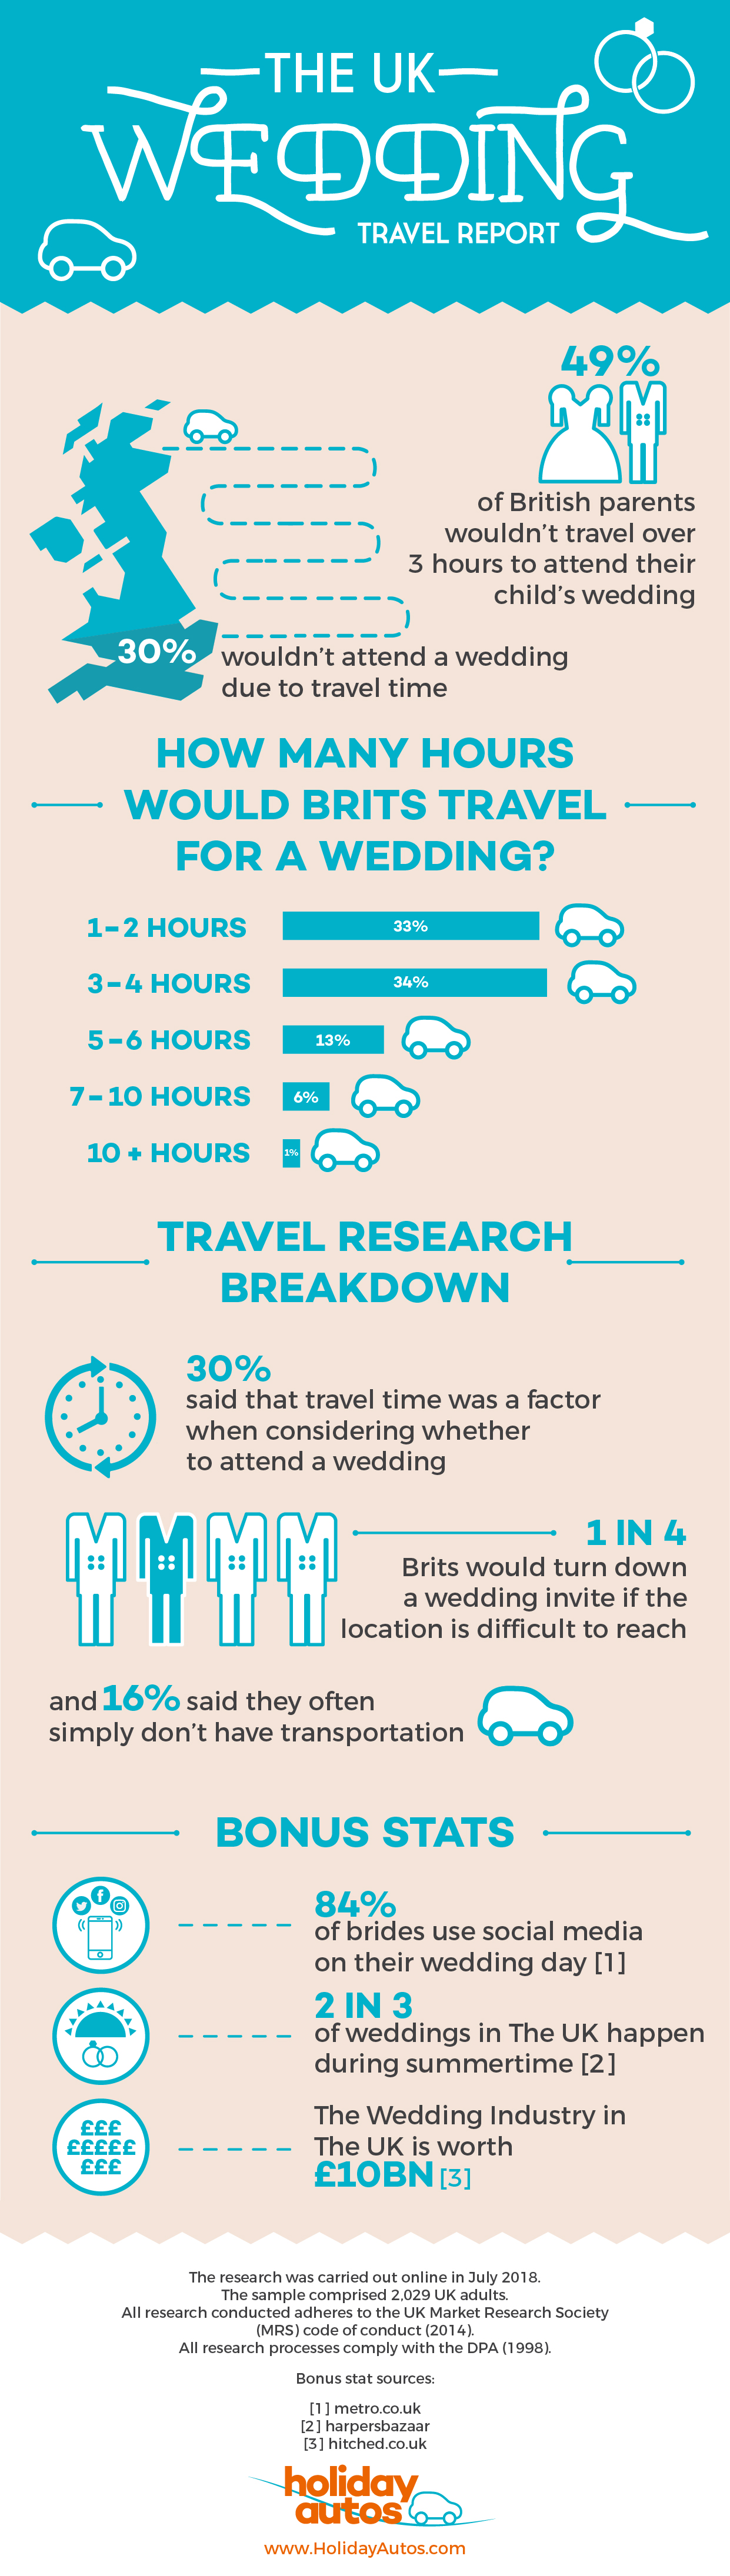 Holiday Autos - Branded Infographic-01